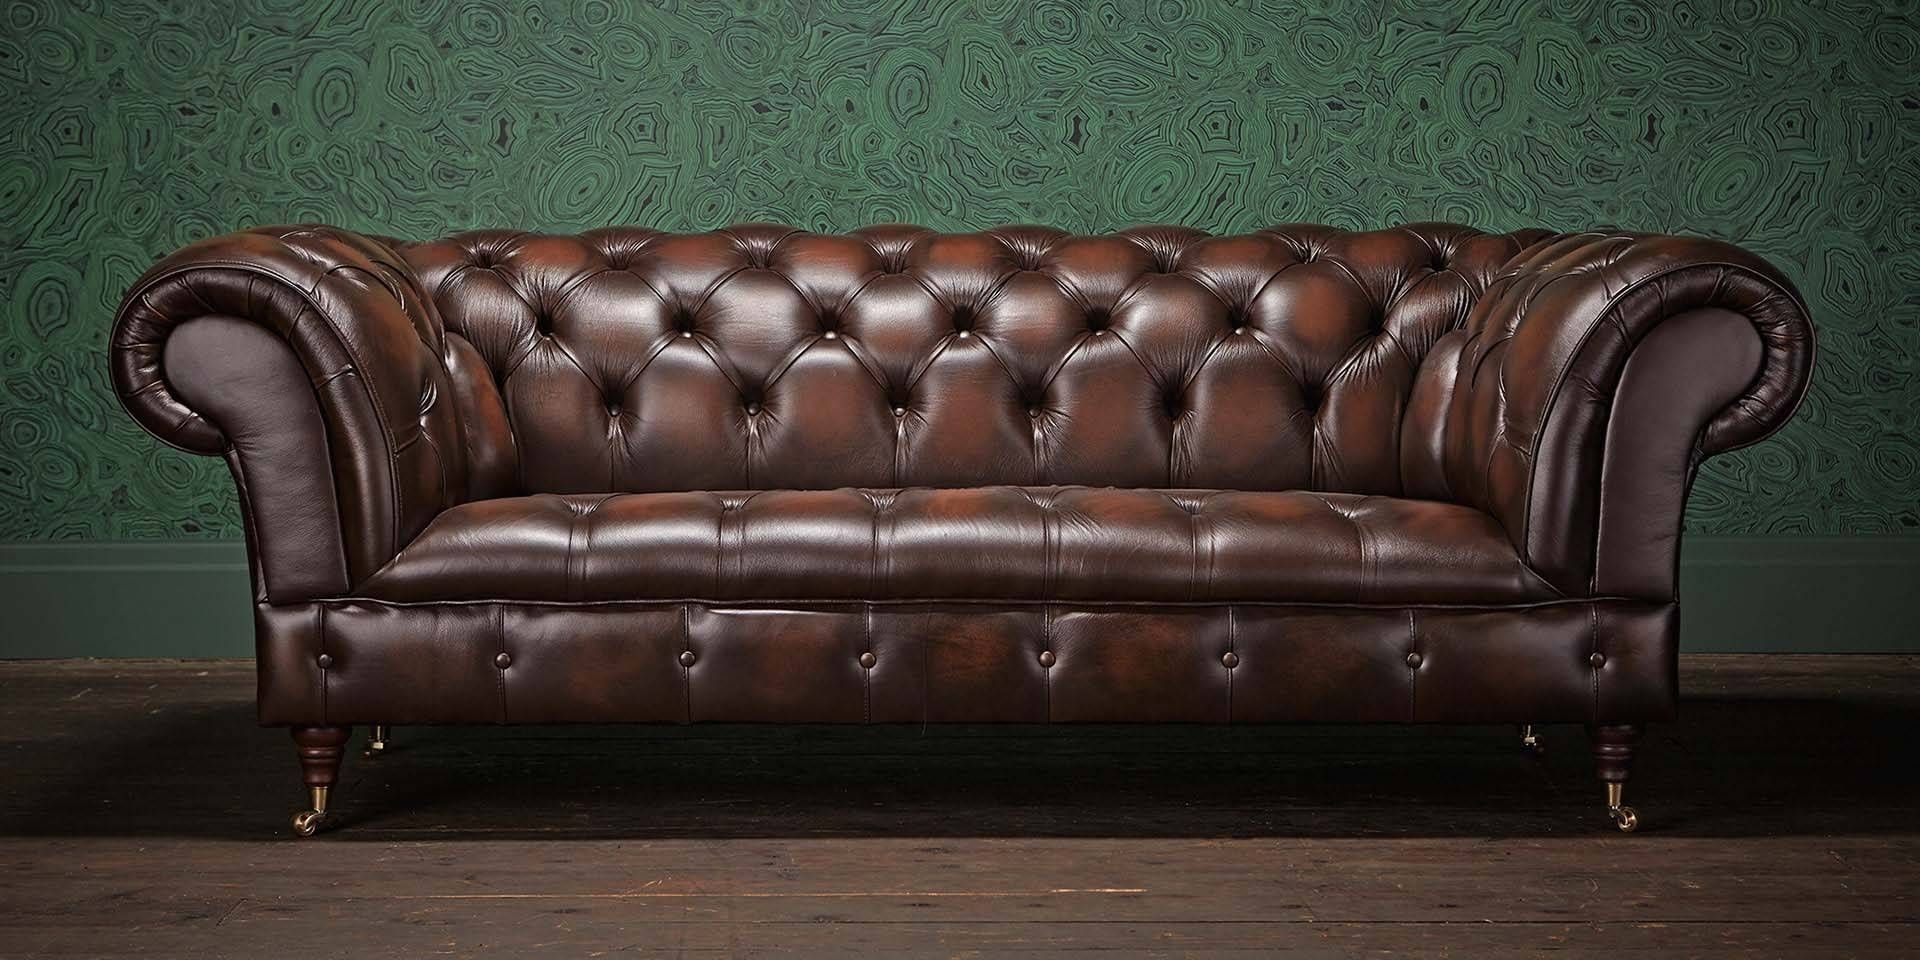 Chesterfields Of England | The Original Chesterfield Company For Chesterfield Sofa And Chairs (View 3 of 30)